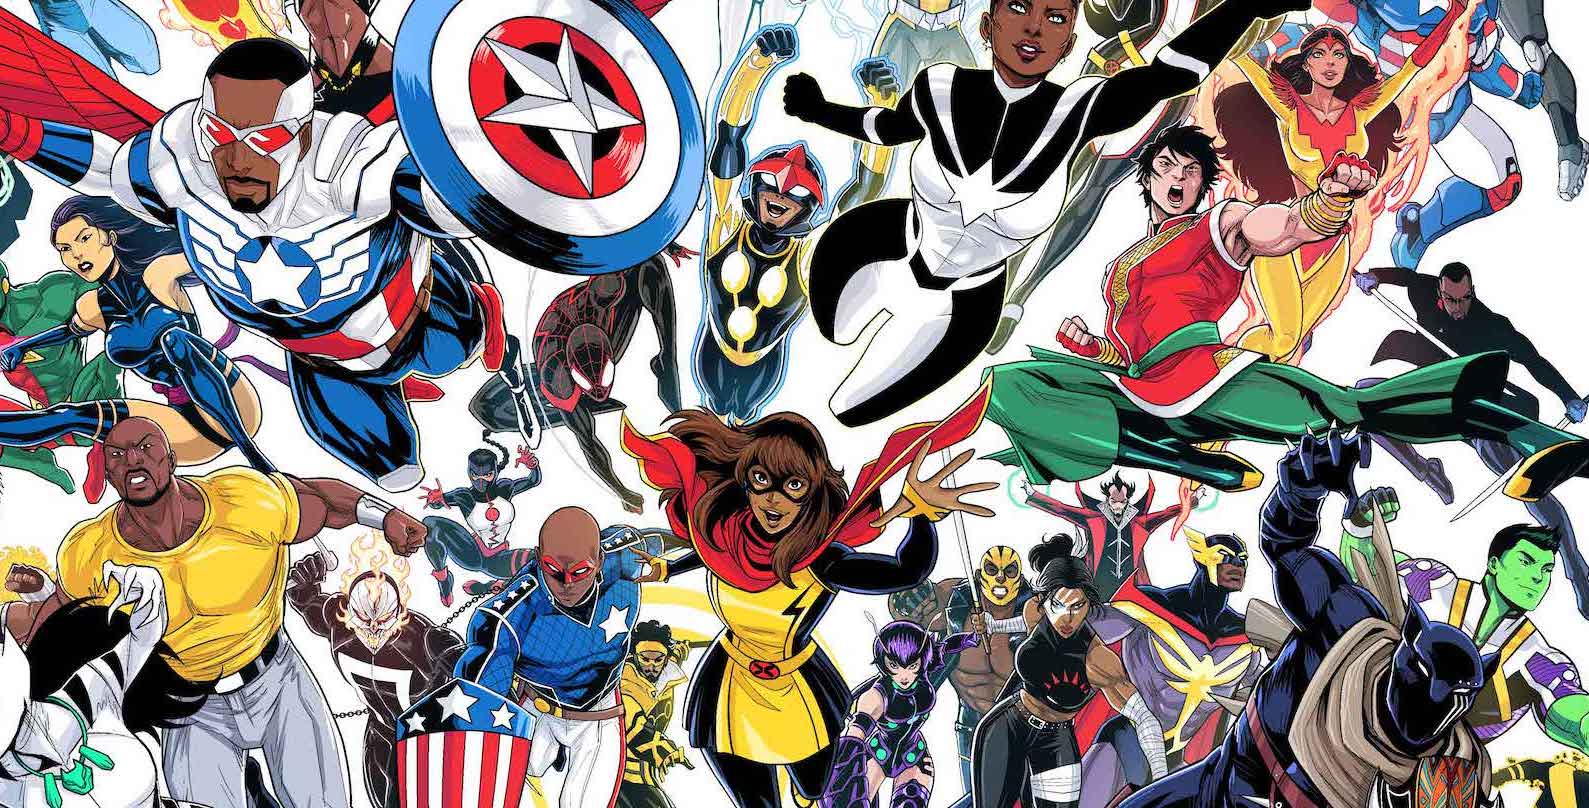 Get a closer look at 'Marvel's Voices: Avengers' #1